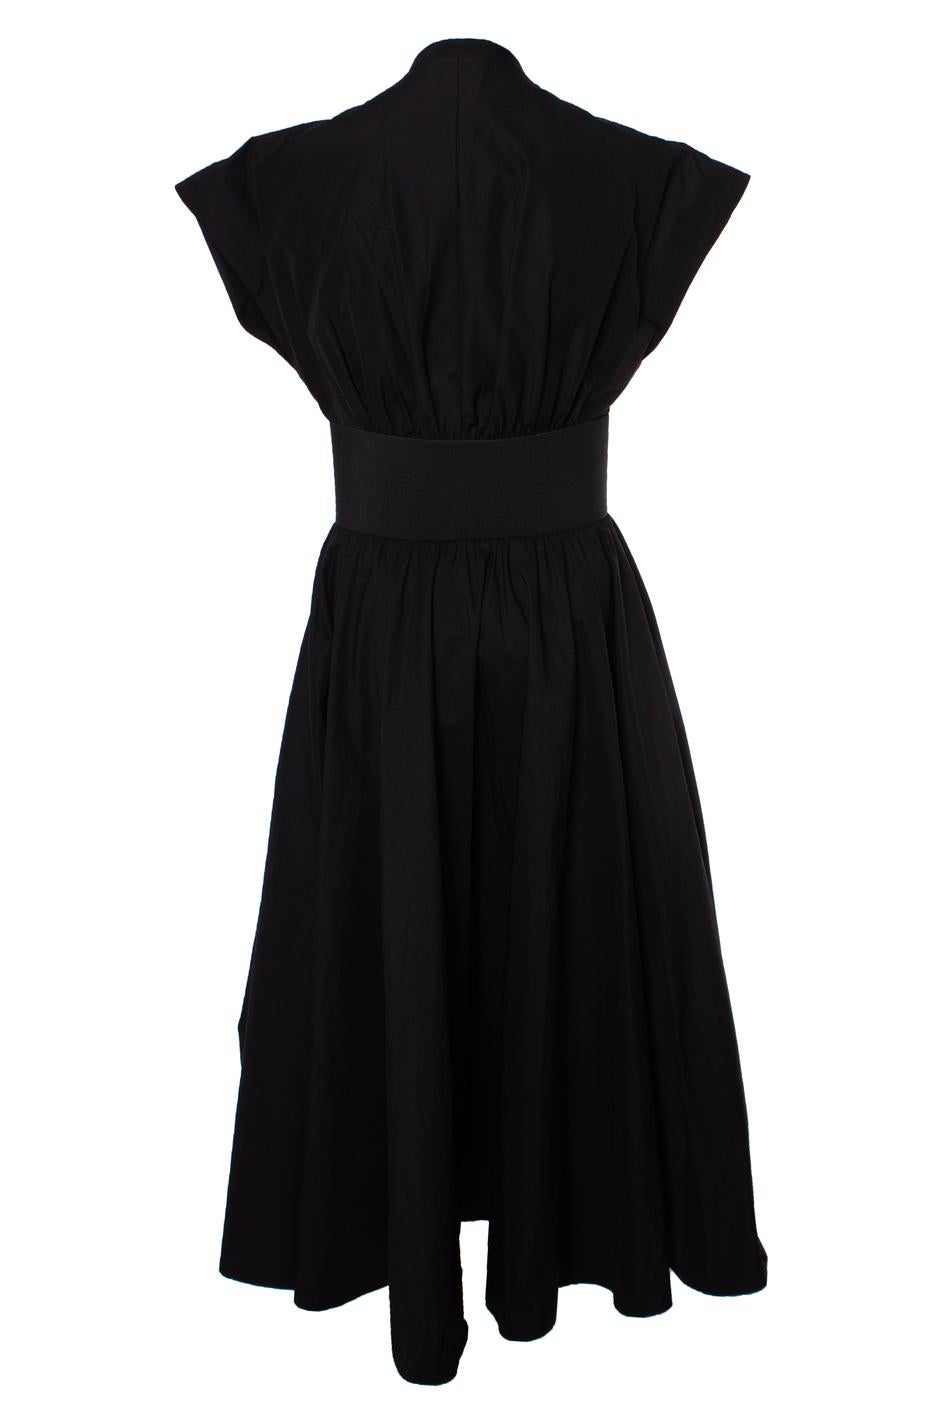 Alaia, Belted cotton midi poplin dress in black. The item is in very good condition.

• CONDITION: very good condition 

• SIZE: FR42 - L 

• MEASUREMENTS: length 130 cm, width 45 cm, waist 39 cm, shoulder width 42 cm, sleeve length 8 cm

•